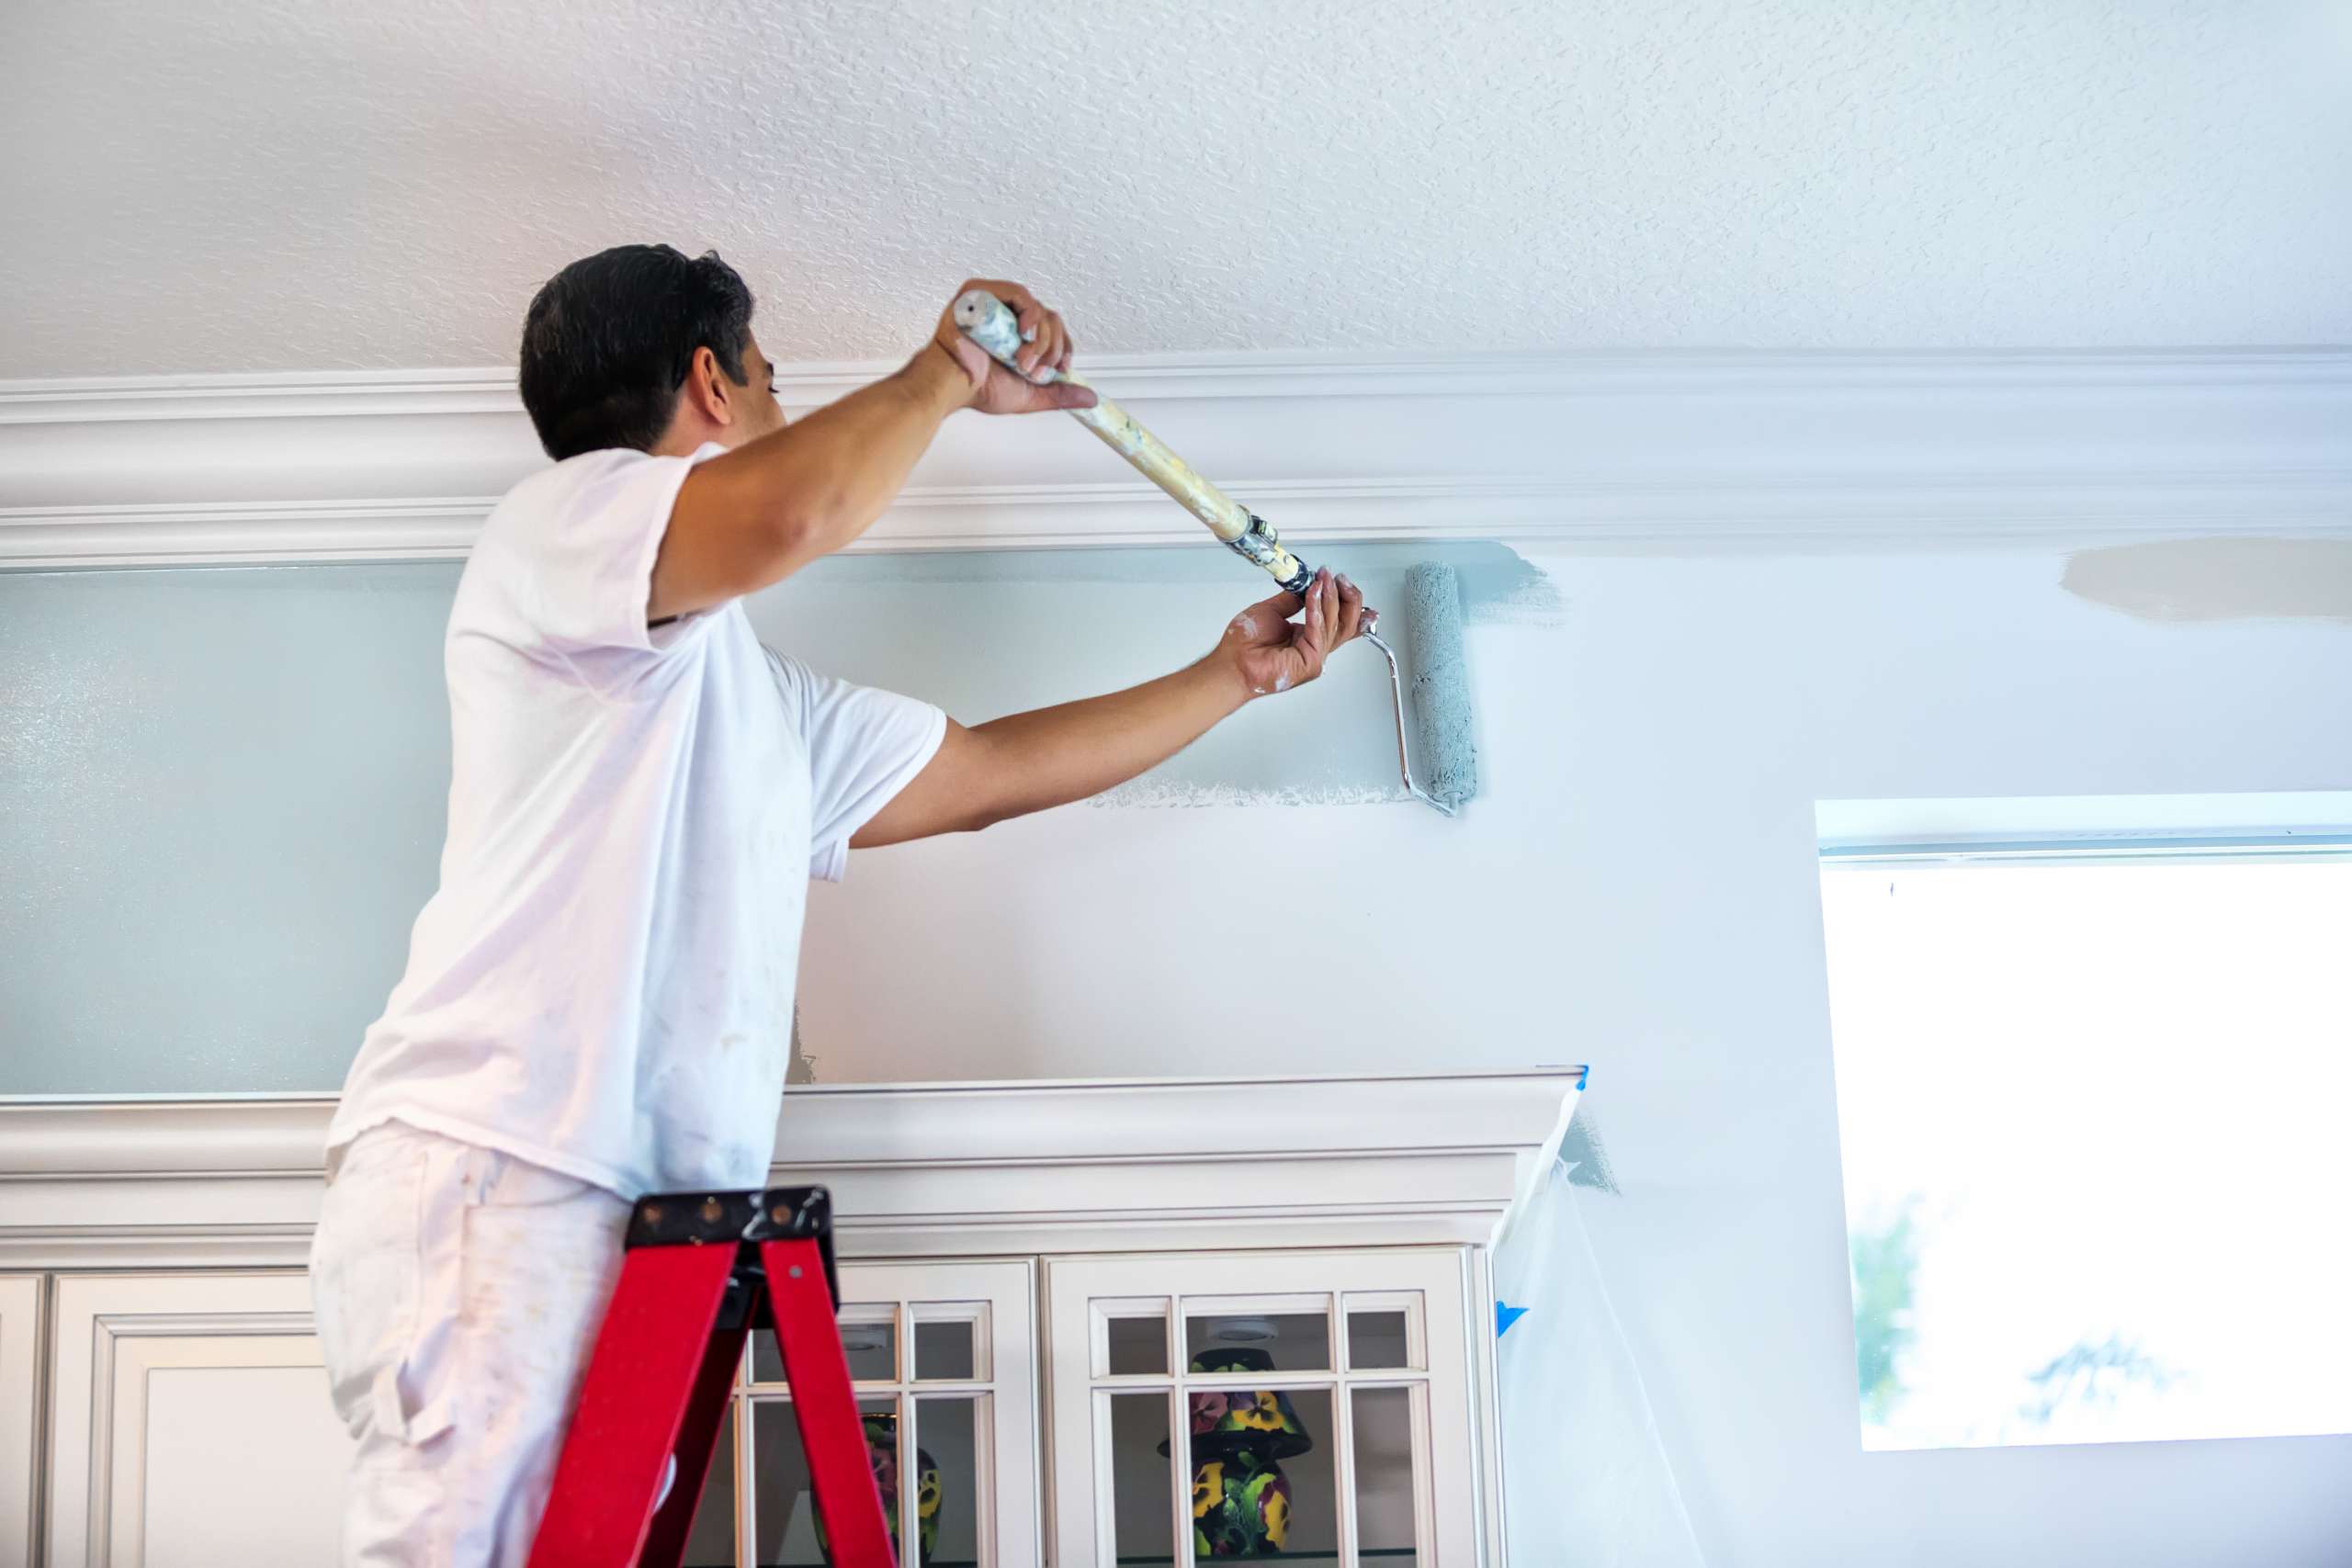 House painter painting residential home interior